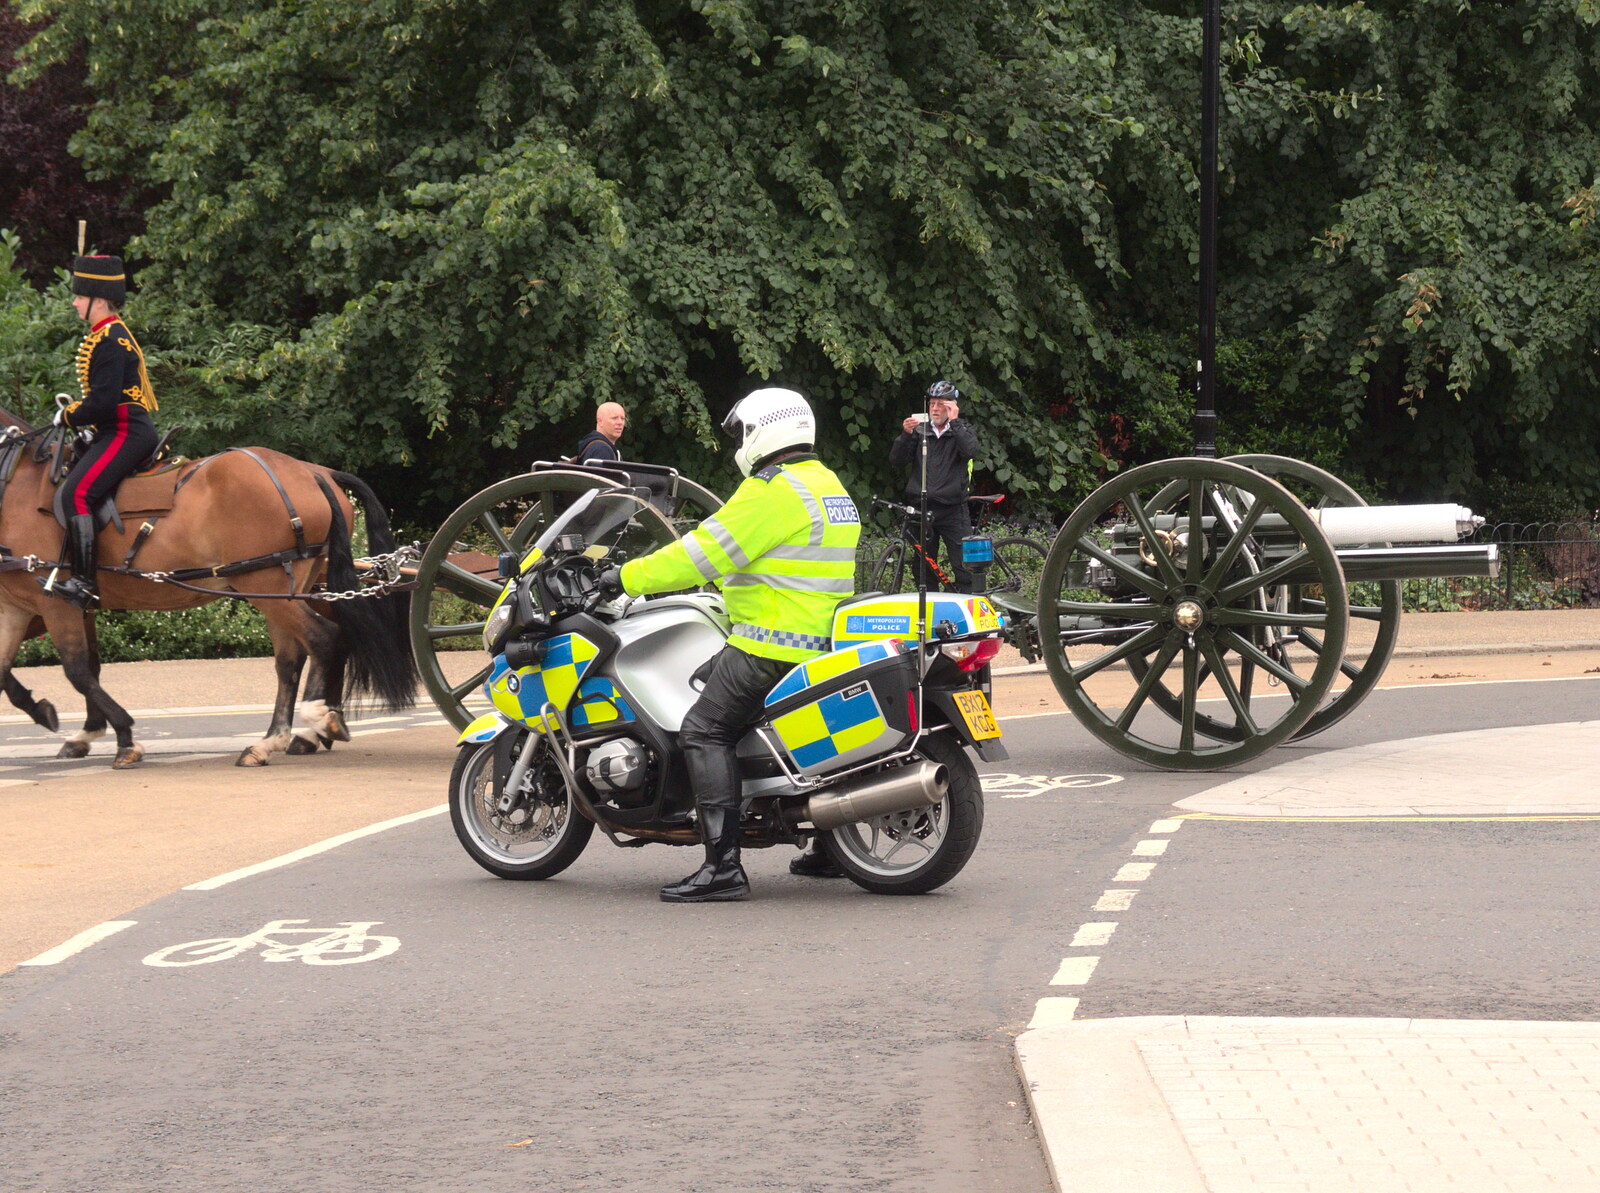 Gun carriages trundle past a motorbike rozzer from The BSCC at the Victoria and The Grain Beer Festival, Diss, Norfolk - 8th July 2017